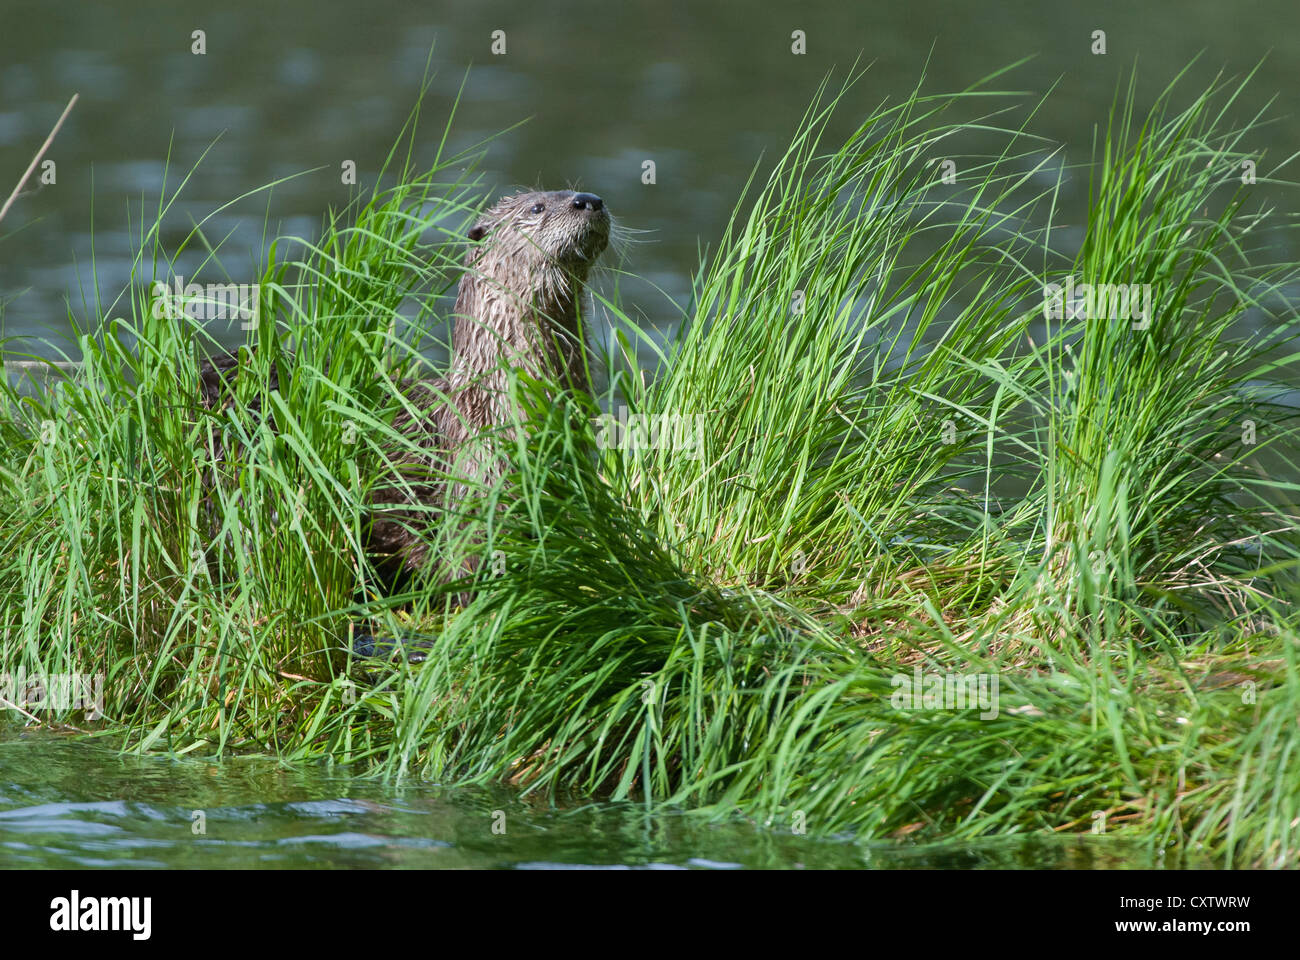 Northern River Otter - Lontra canadensis - Yellowstone National Park Stock Photo